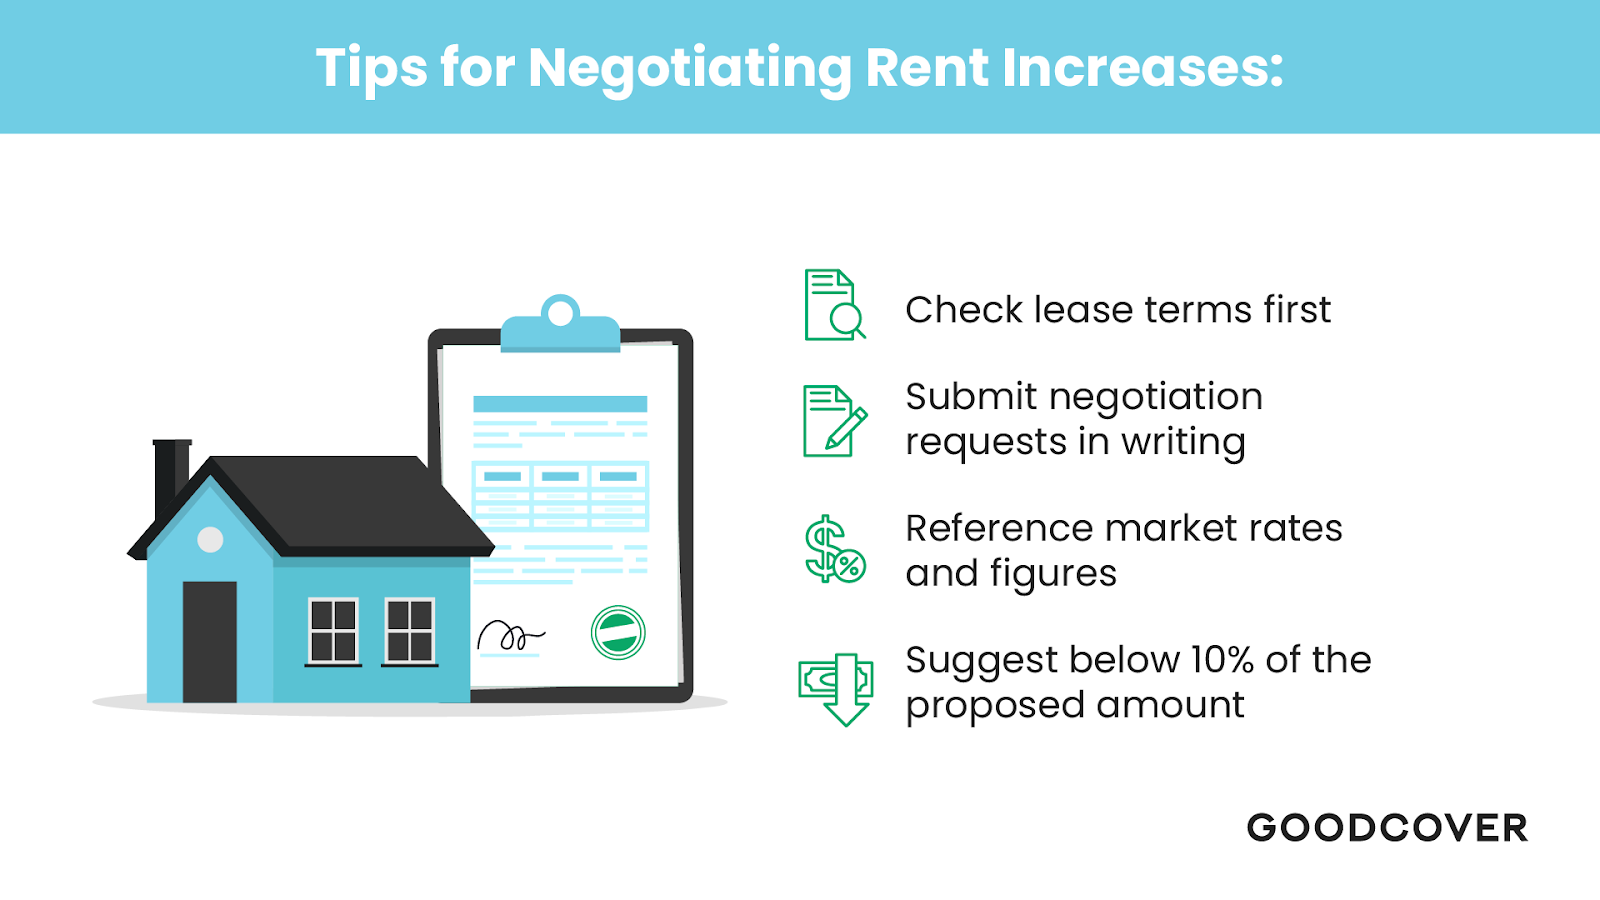 Tips for negotiating rent increases as a renter in PA. 